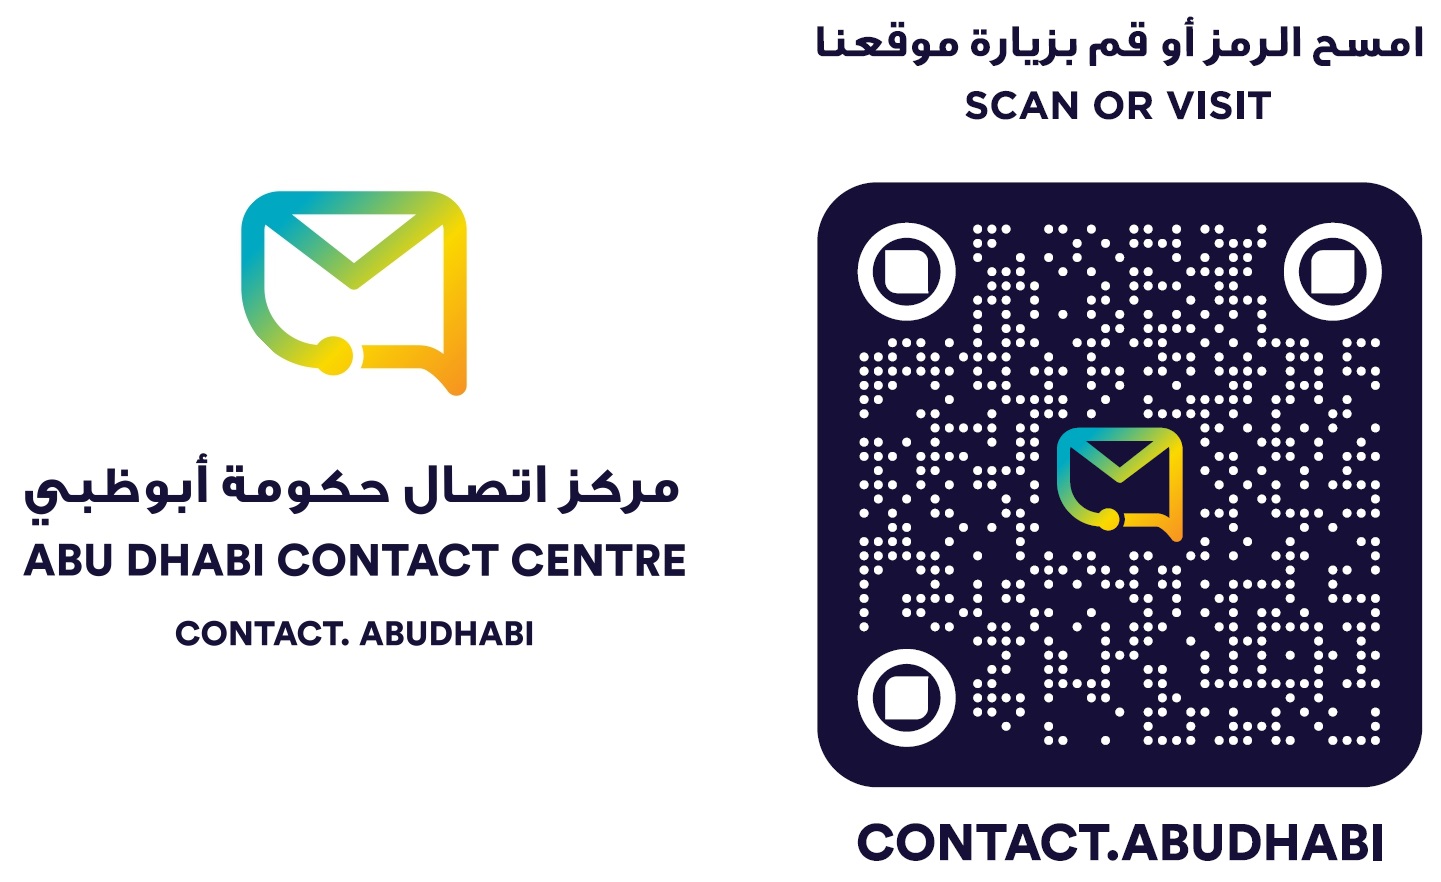 Abu Dhabi Government Contact Centre Launches New Customer Relationship Management Platform